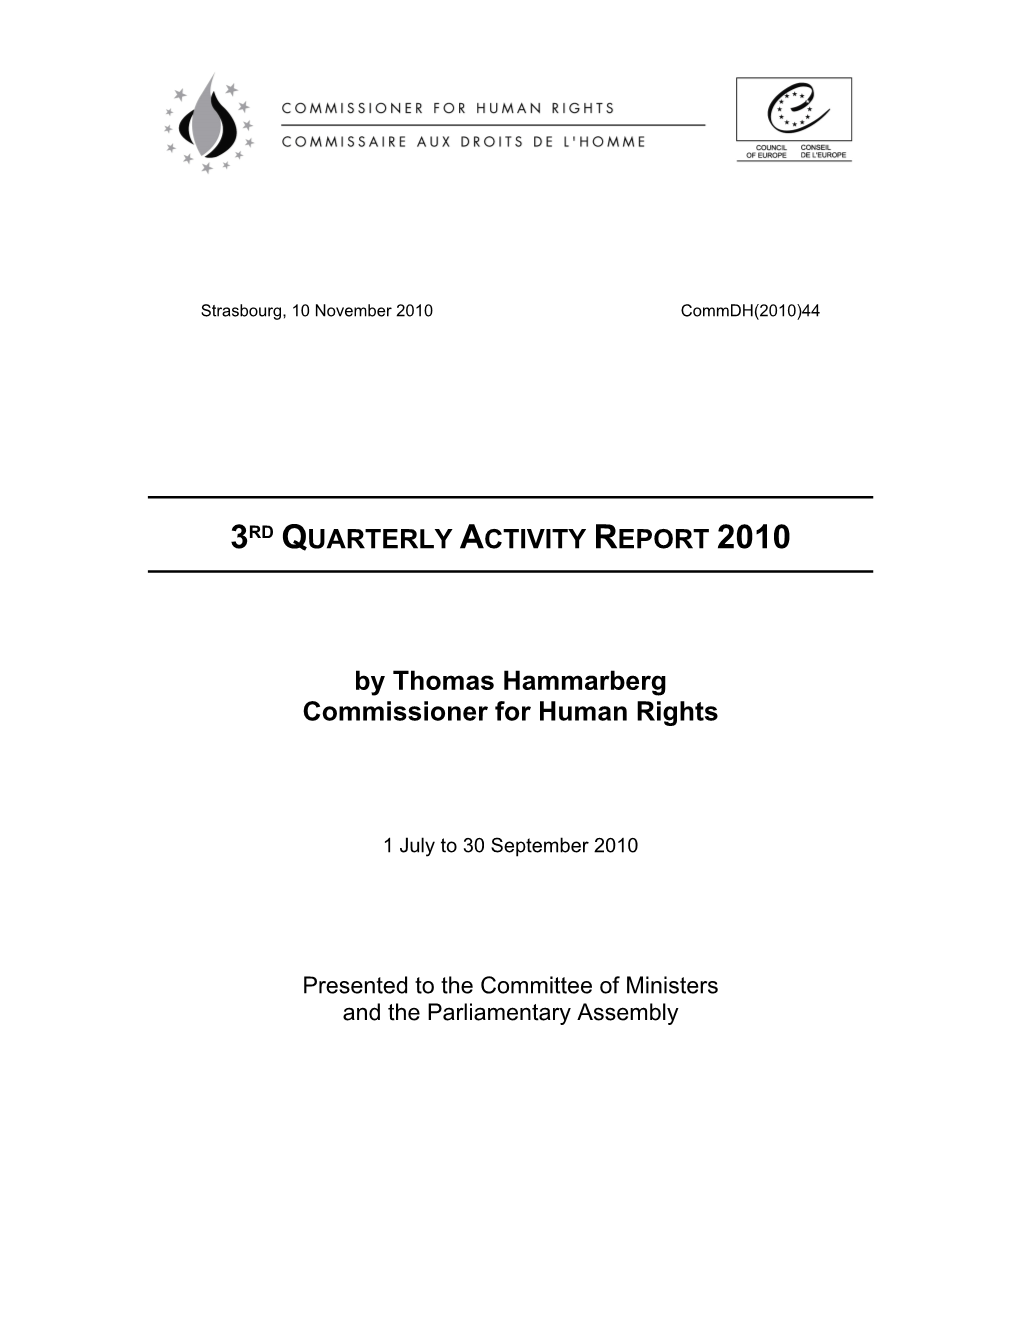 3RD QUARTERLY ACTIVITY REPORT 2010 by Thomas